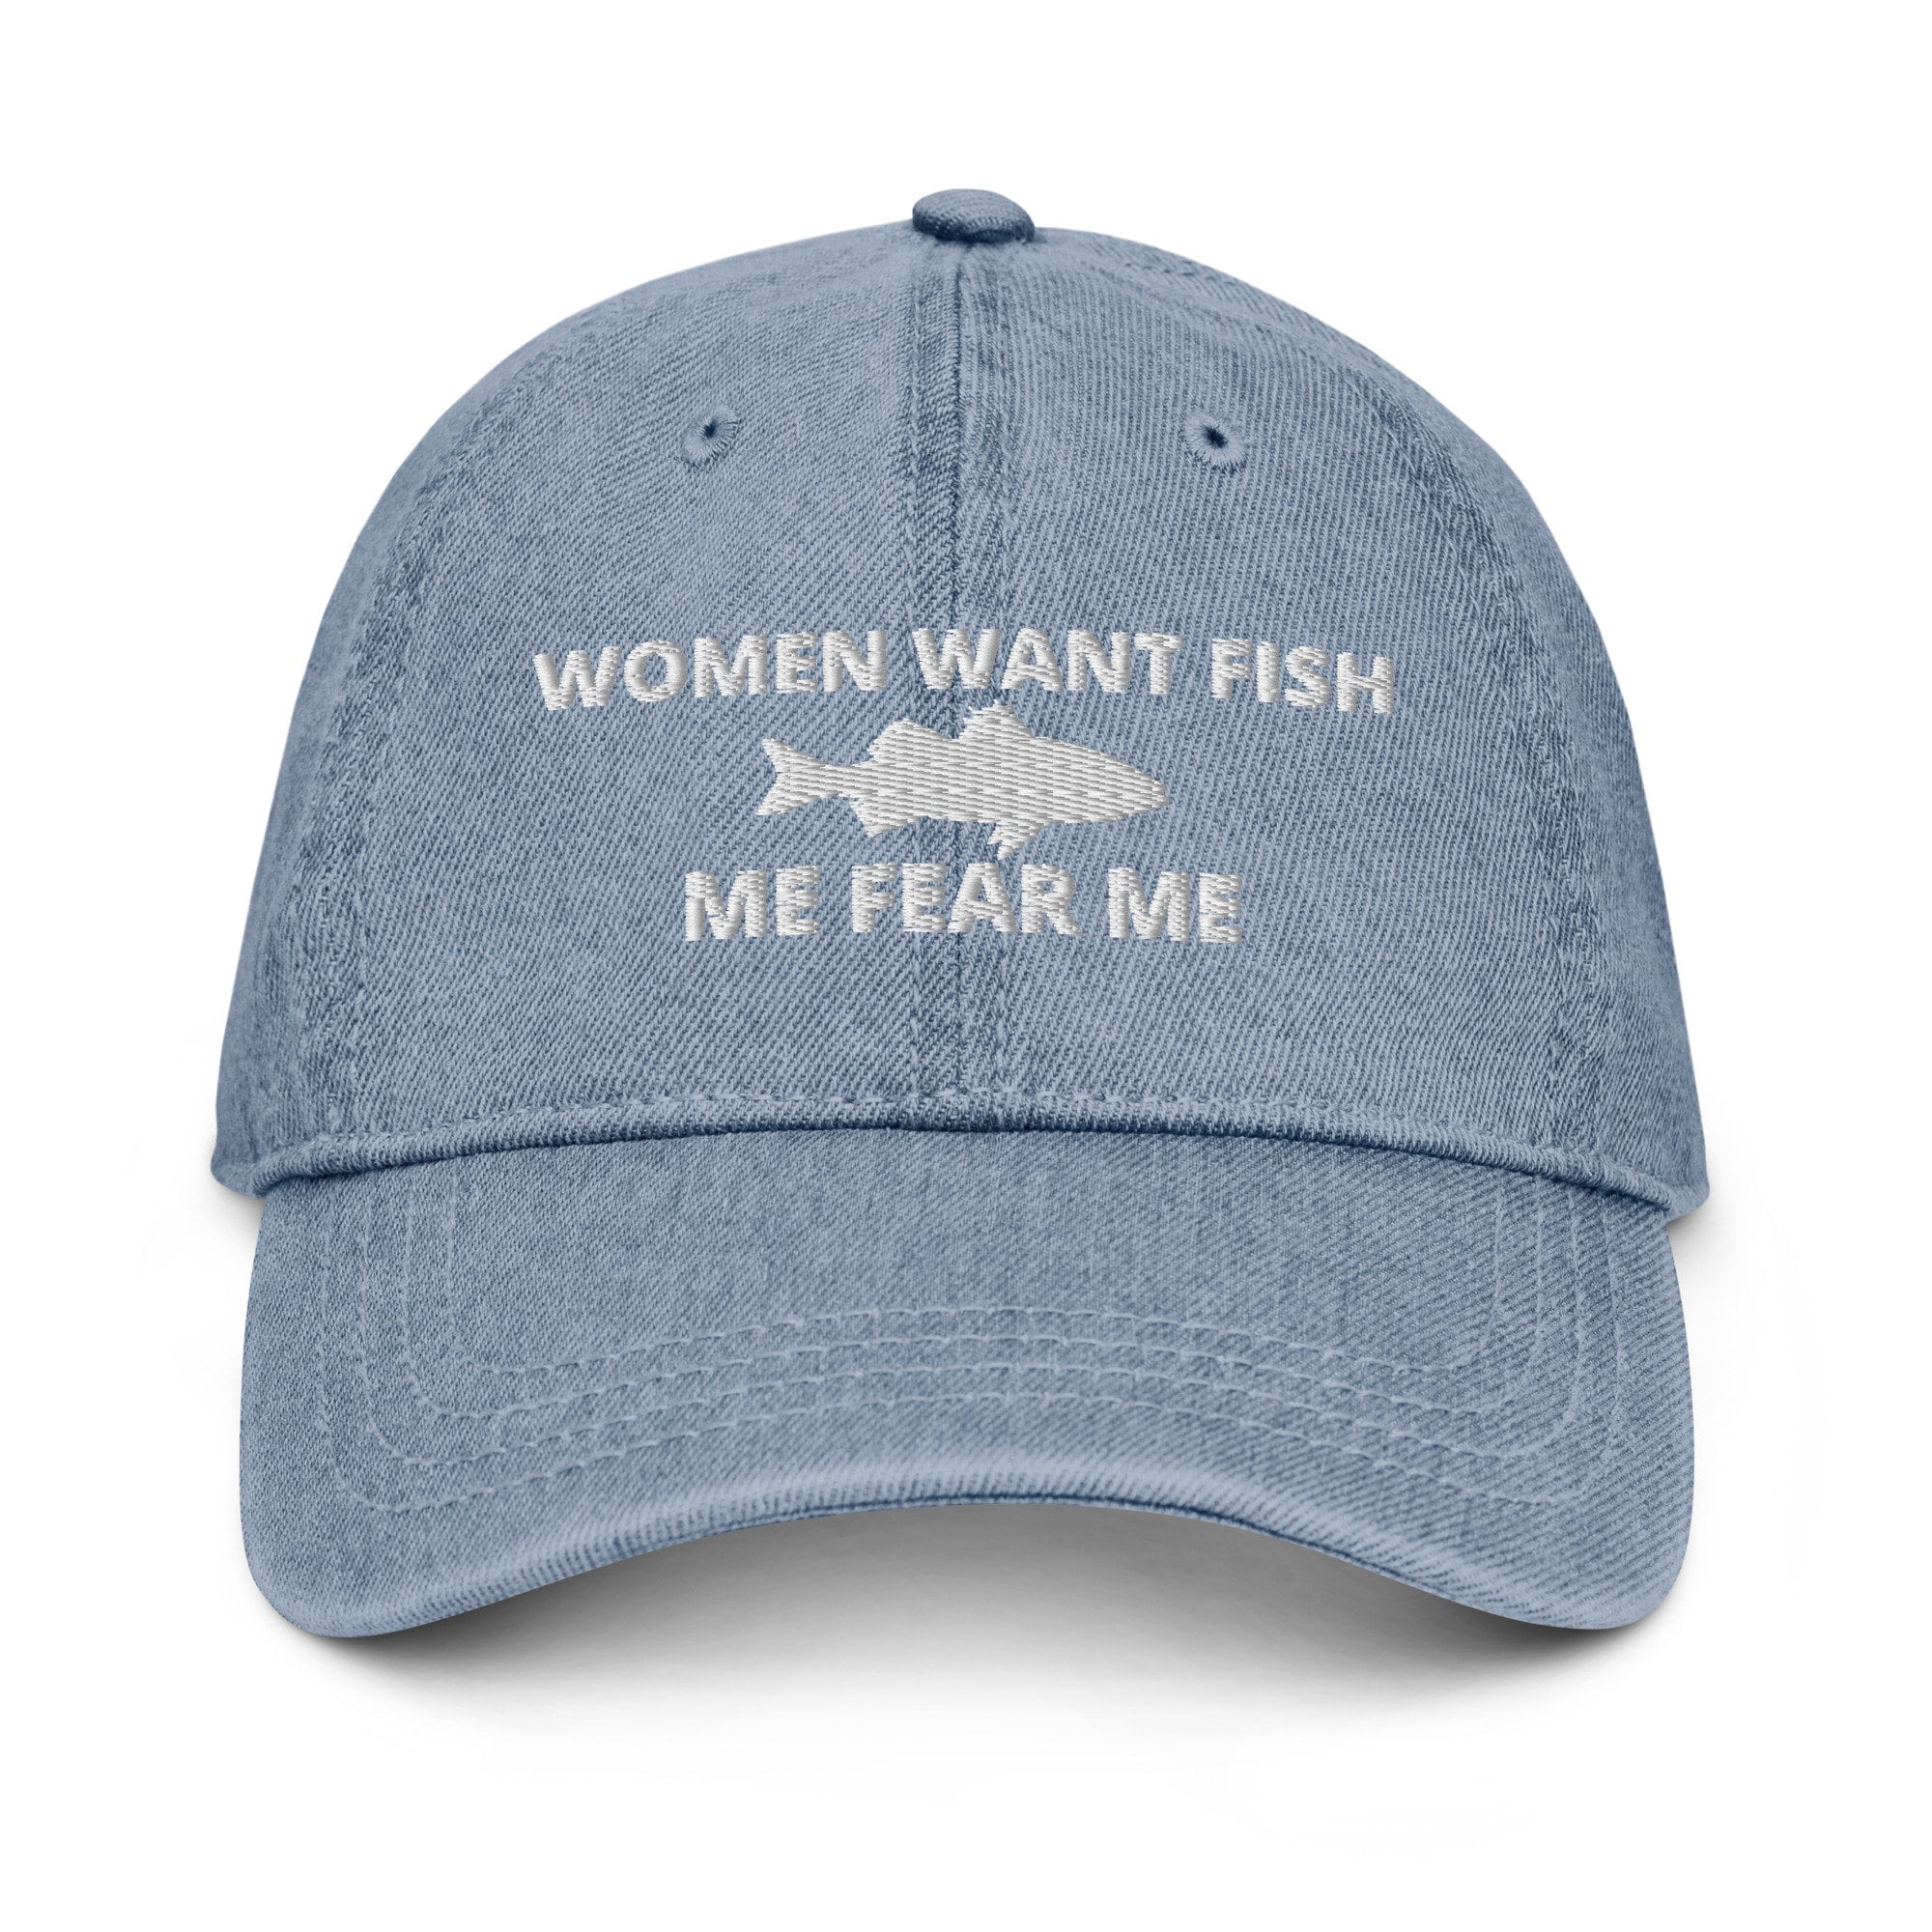 Women Want Fish, Me Fear Me, Embroidered Denim Hat Cap 